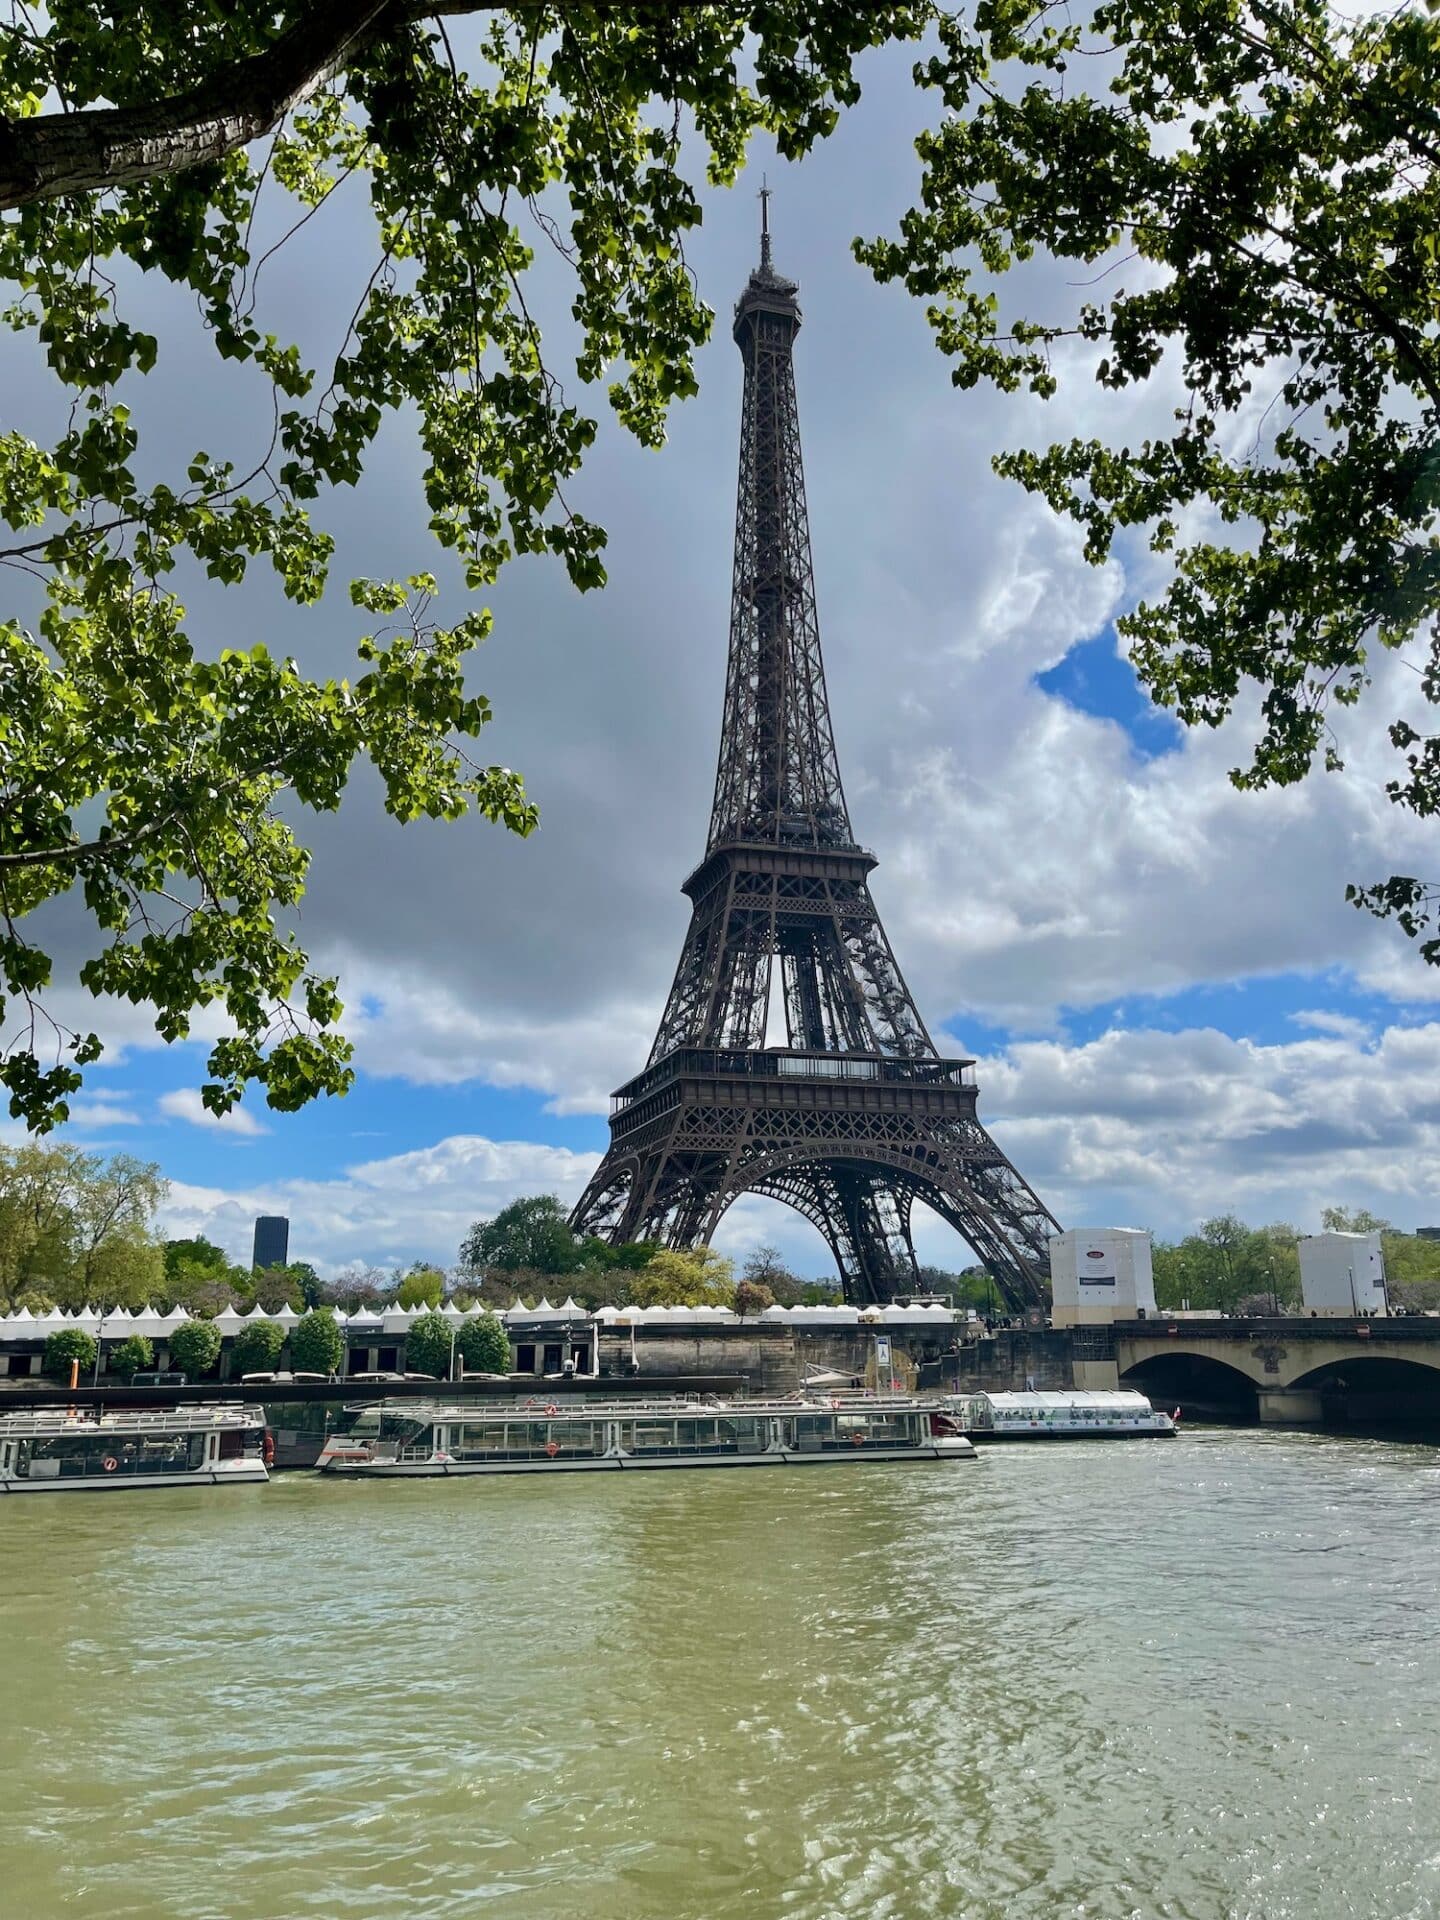 The Eiffel Tower stands majestically against a cloudy sky, viewed from the riverbank with verdant tree branches arching overhead. A river cruise boat is docked along the Seine, waiting for passengers to embark on a scenic journey through the heart of Paris.